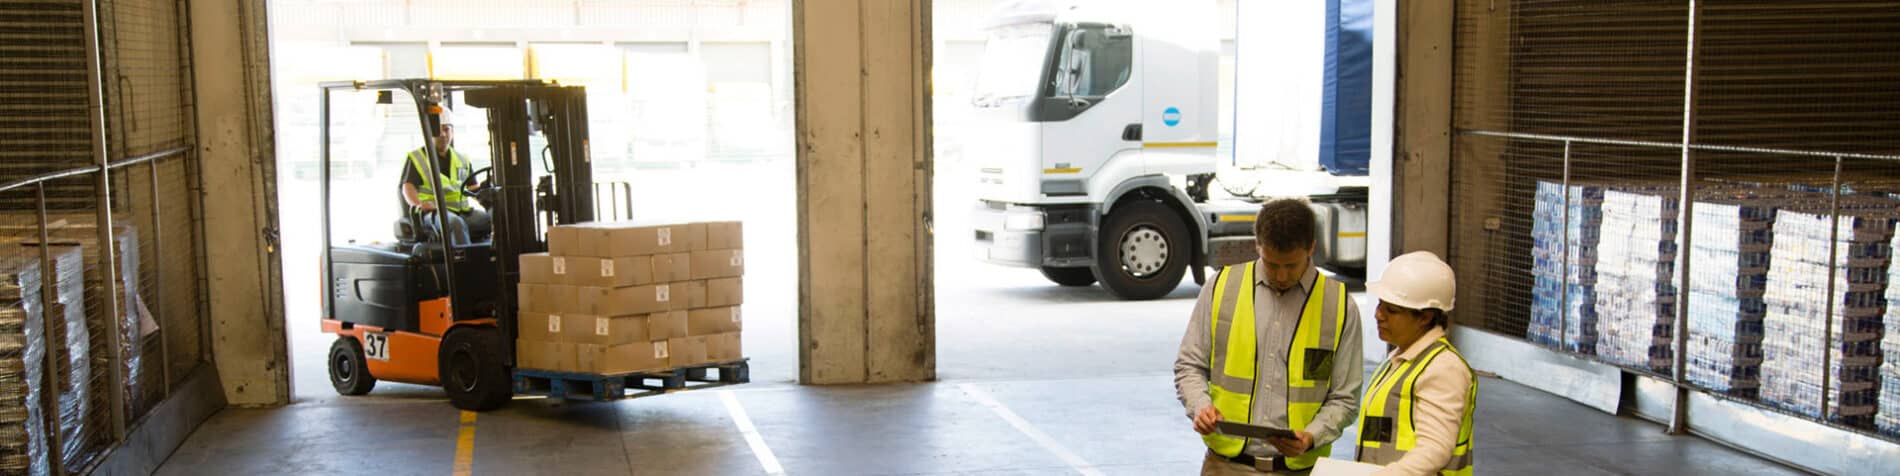 SAP and Uber Freight Join Forces to Deliver On-Demand Logistics Through the Power of Networks